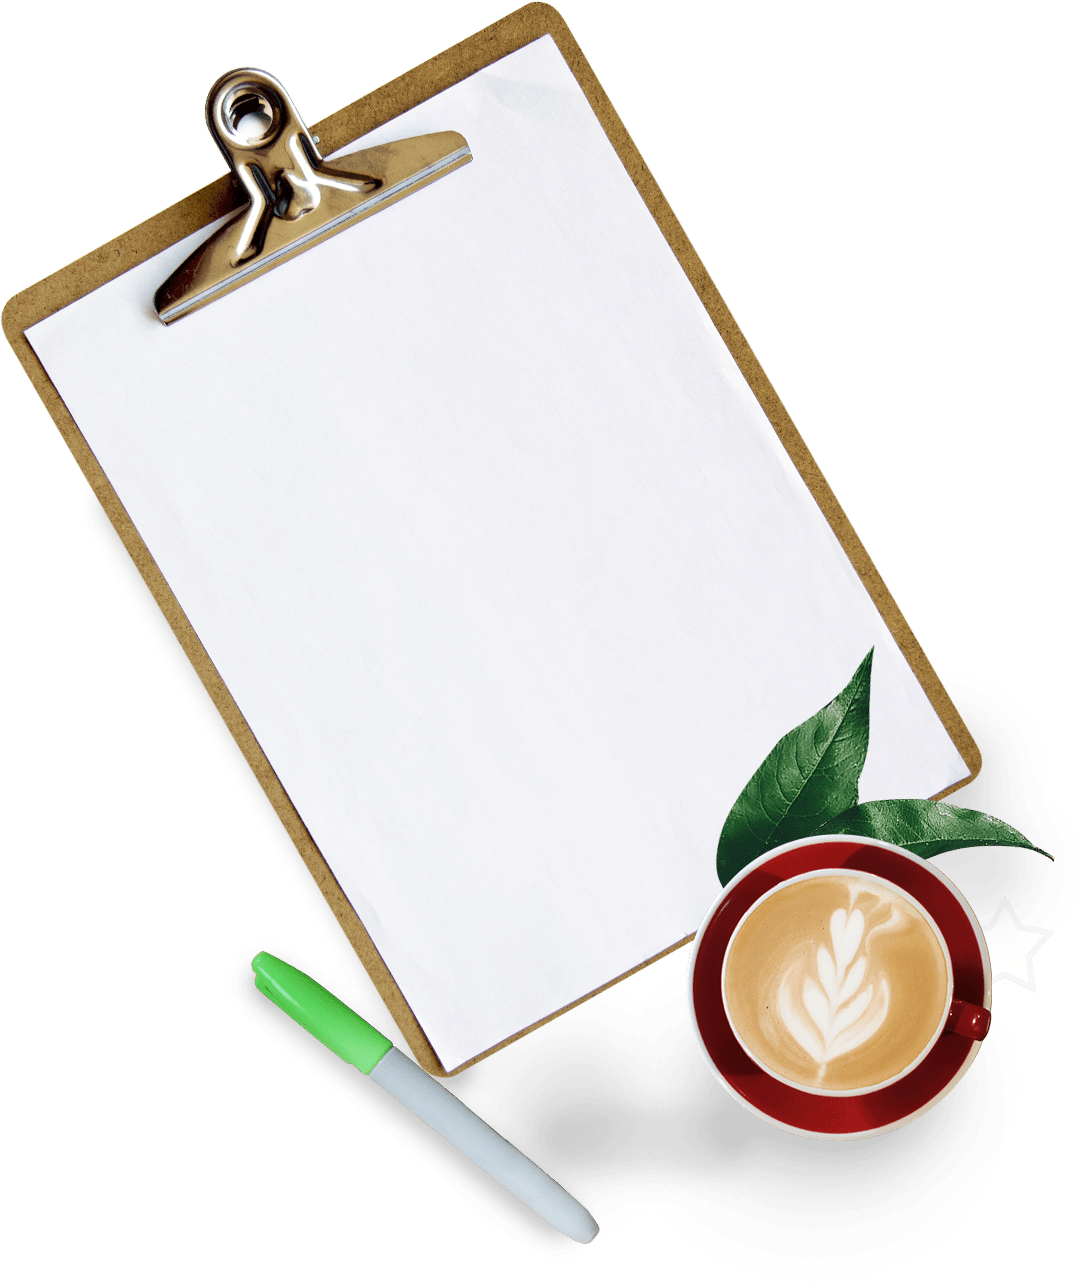 background image of a clipboard, cappucino and marker